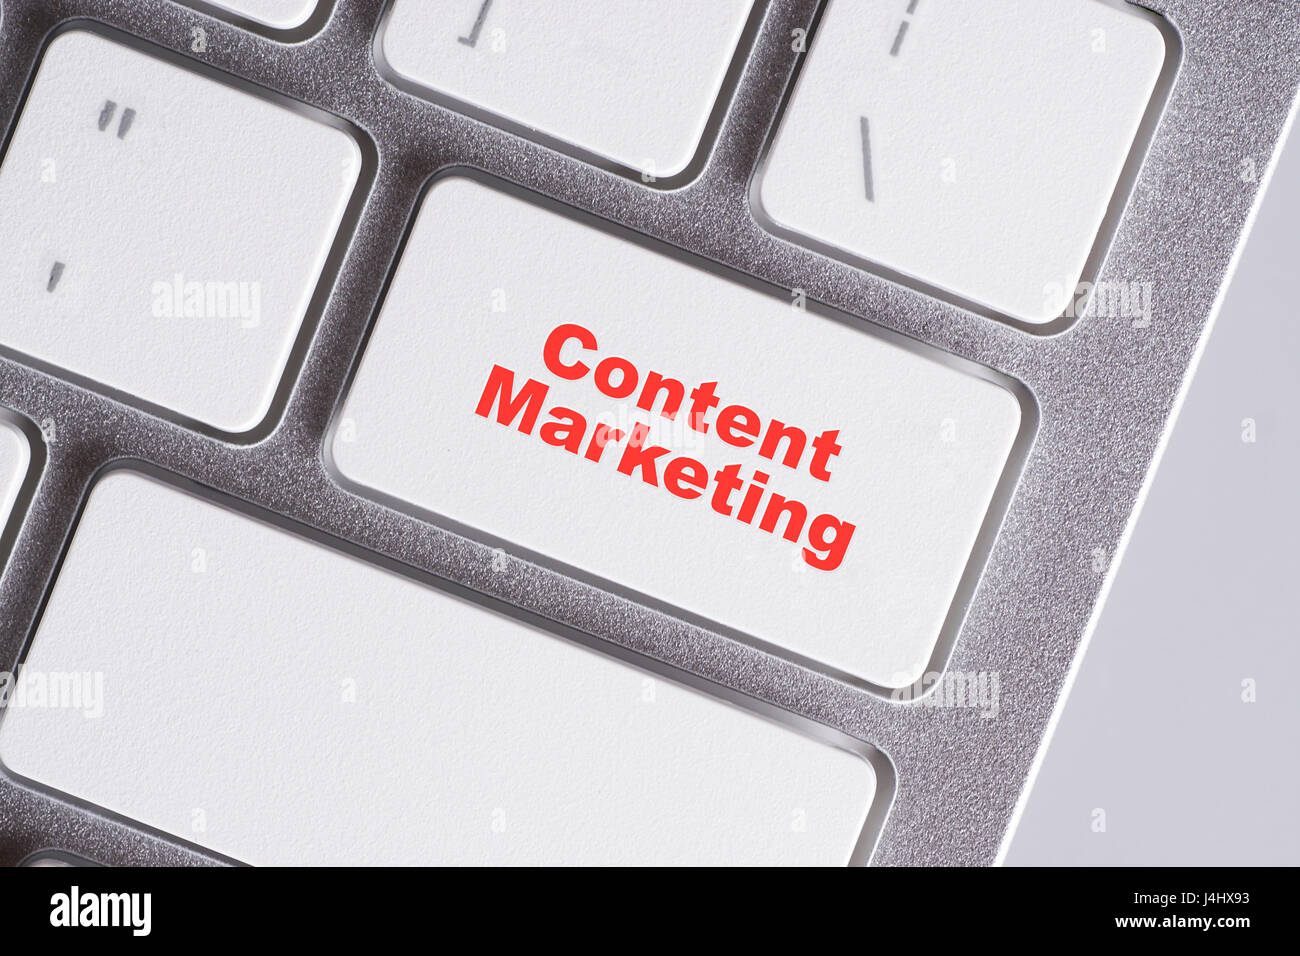 'Content Marketing' red words on white keyboard - online, education and business concept Stock Photo